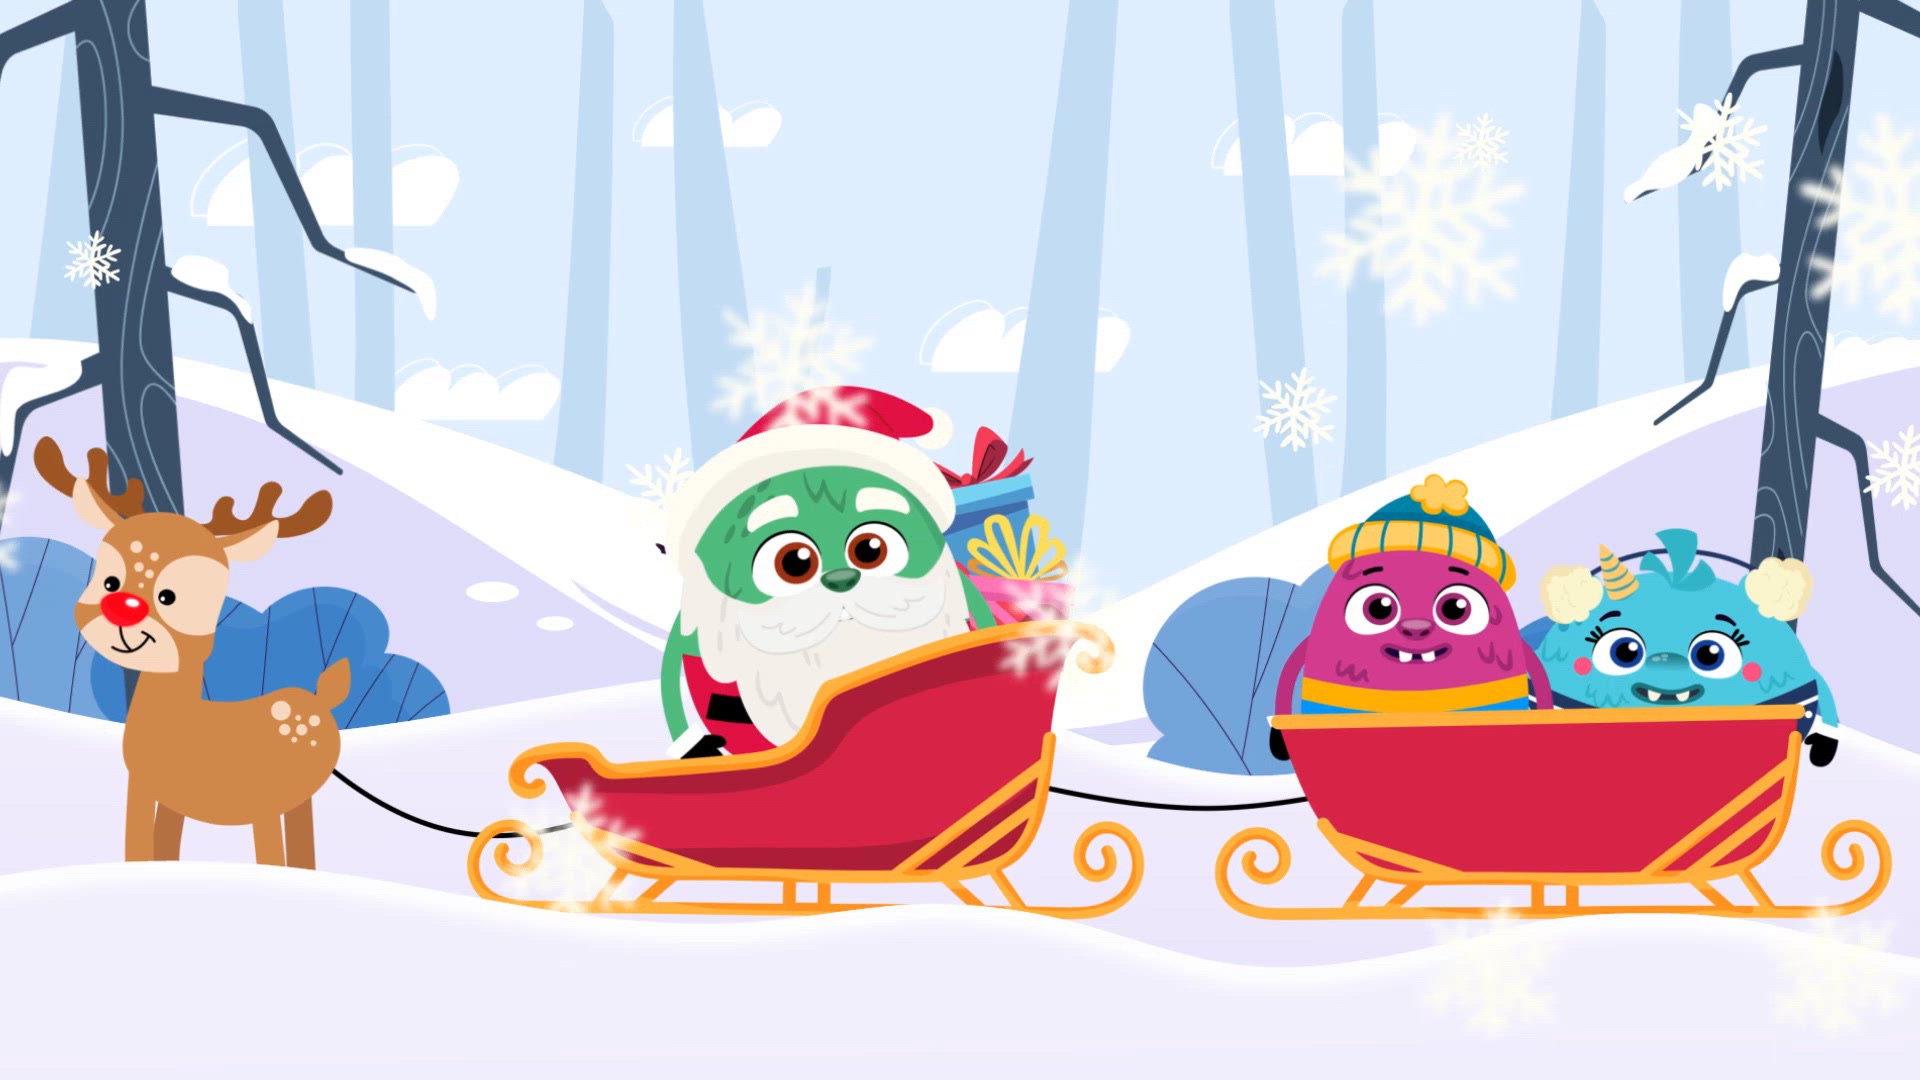 Christmas Freeze Dance - The Kiboomers North Pole Freeze Song for Kids 